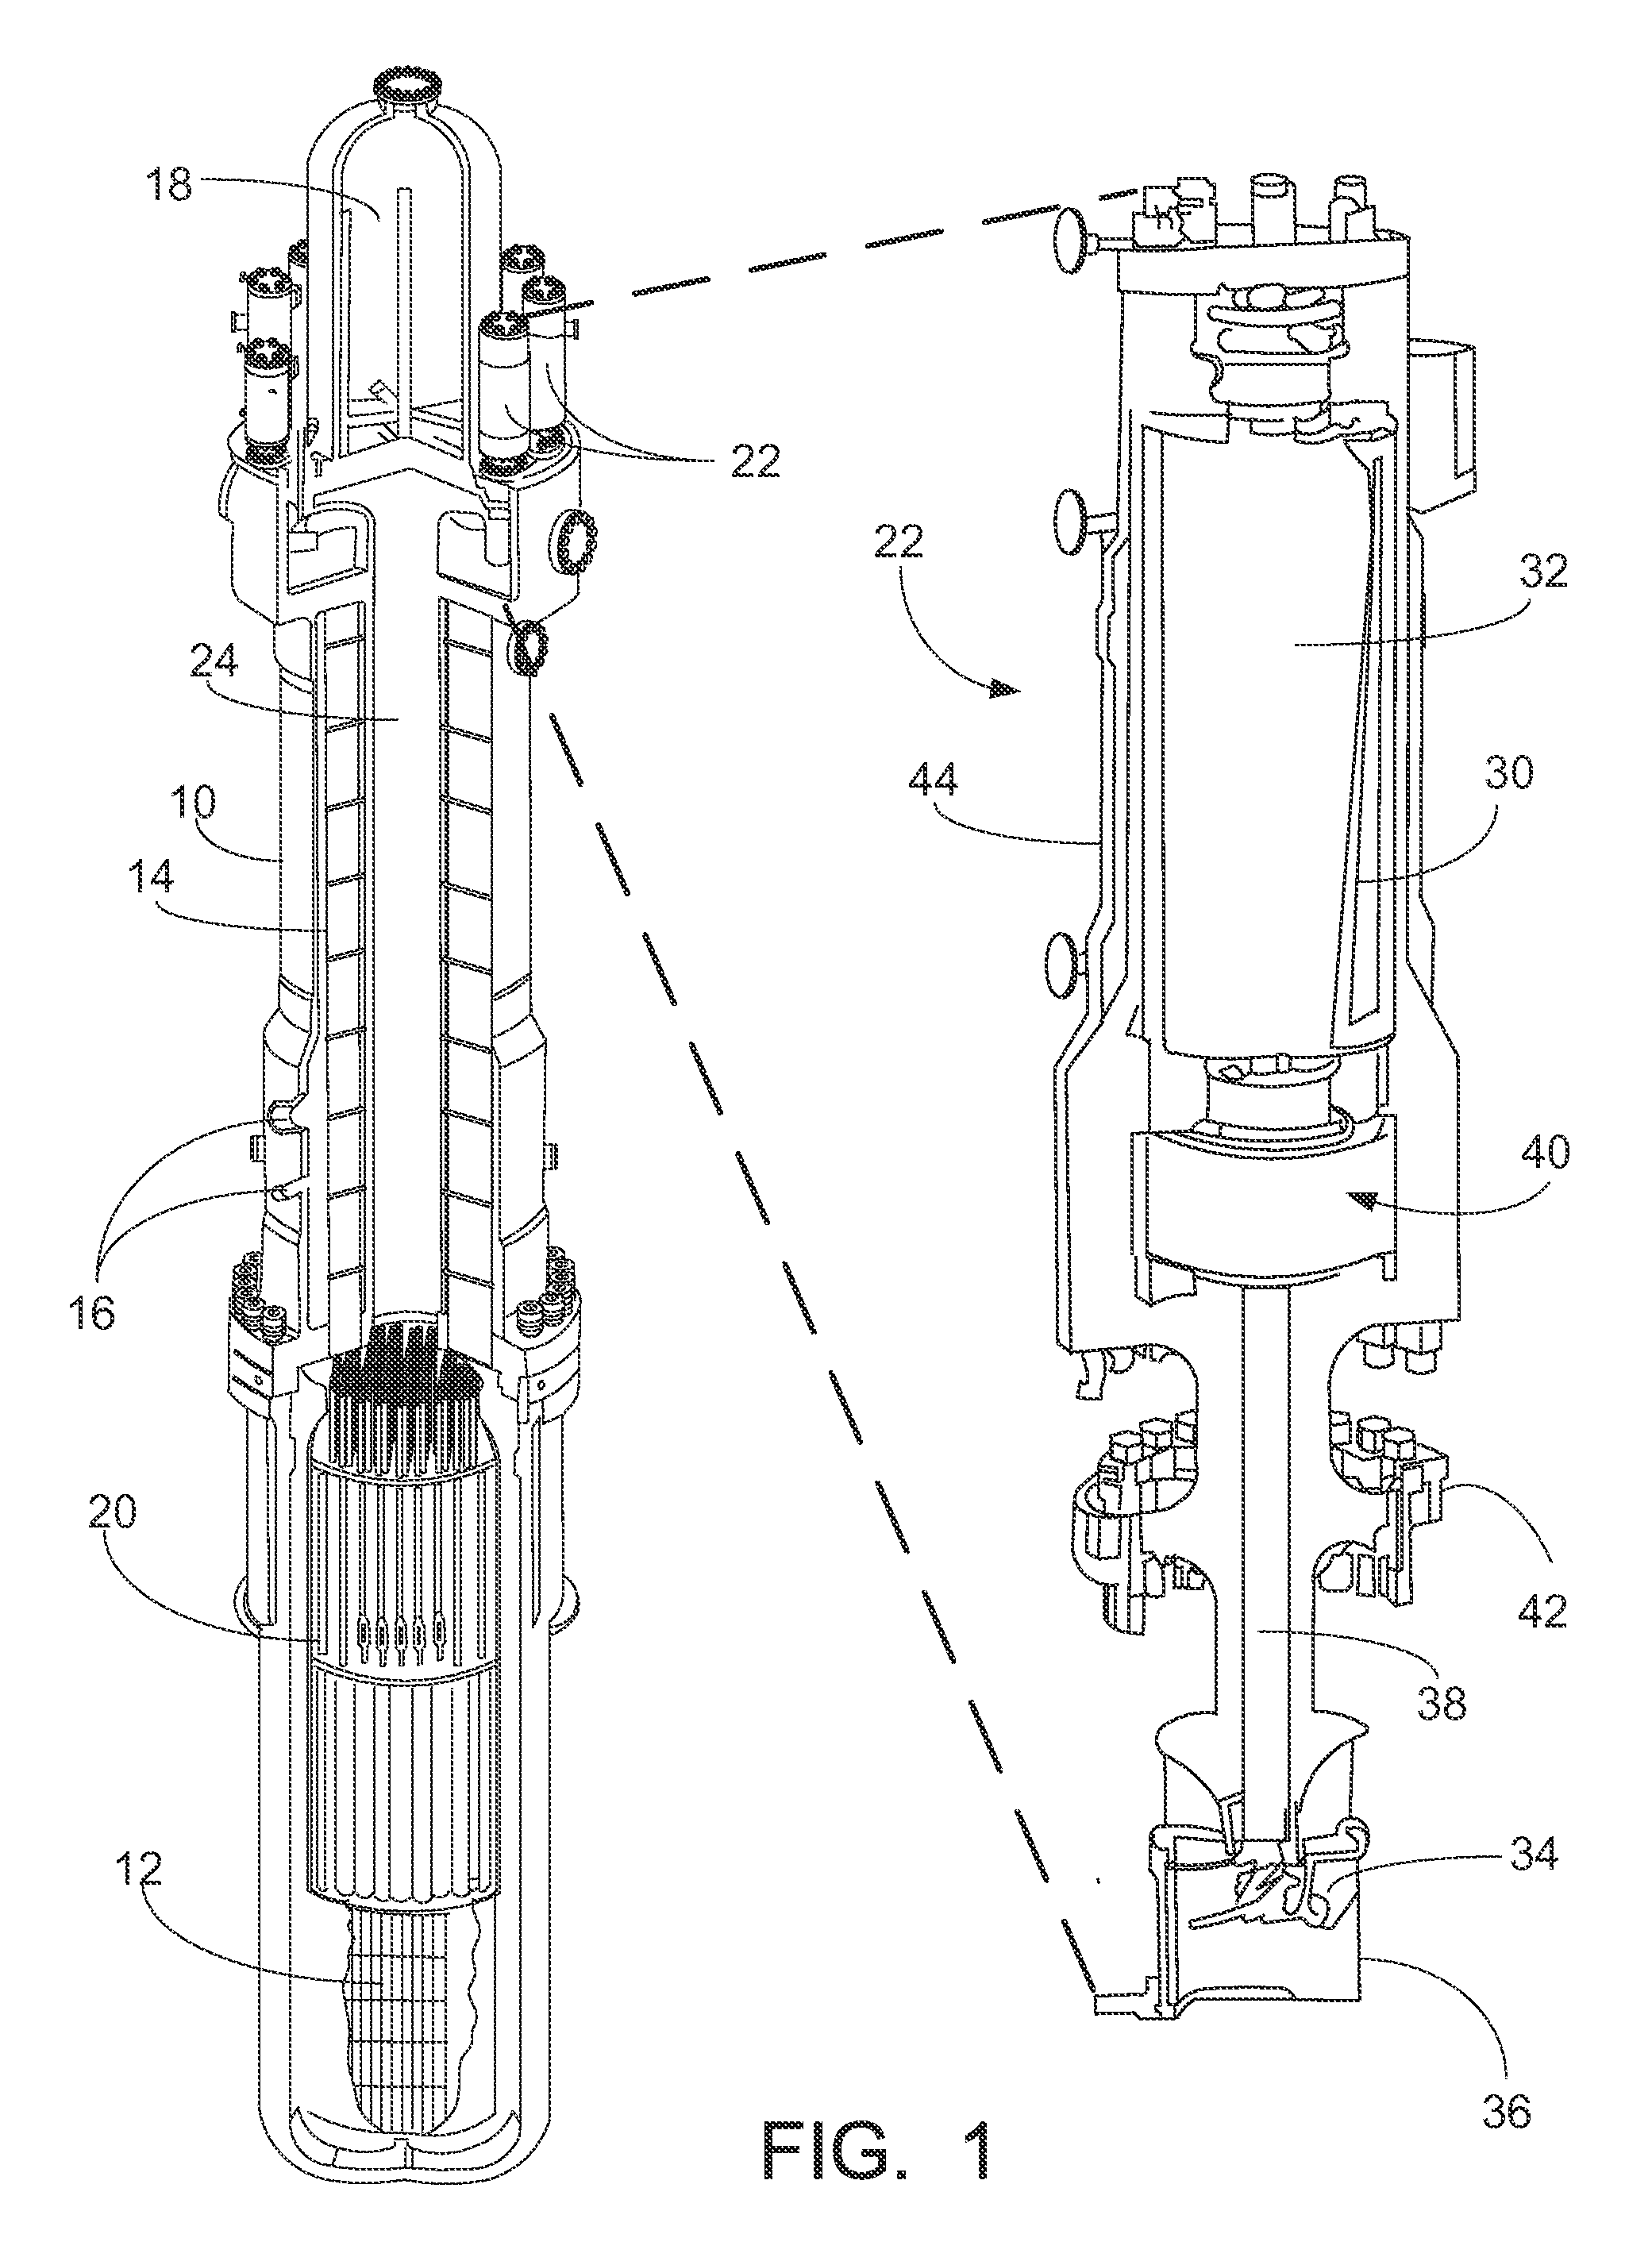 Nuclear reactor coolant pump with high density composite flywheel